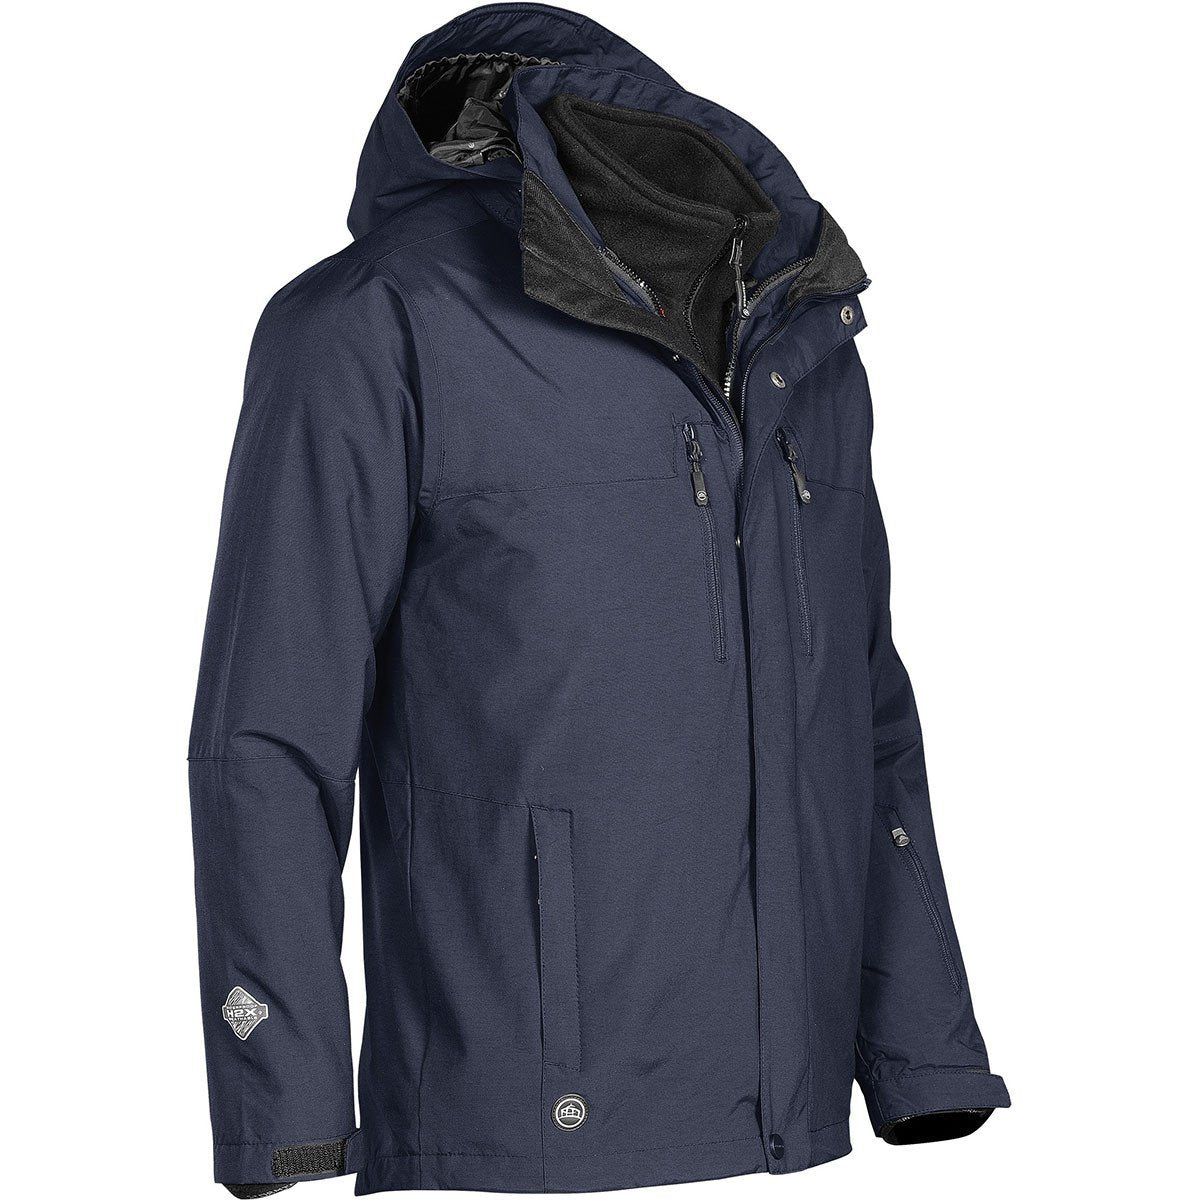 3-in-1 System Jackets - Stormtech Canada Retail